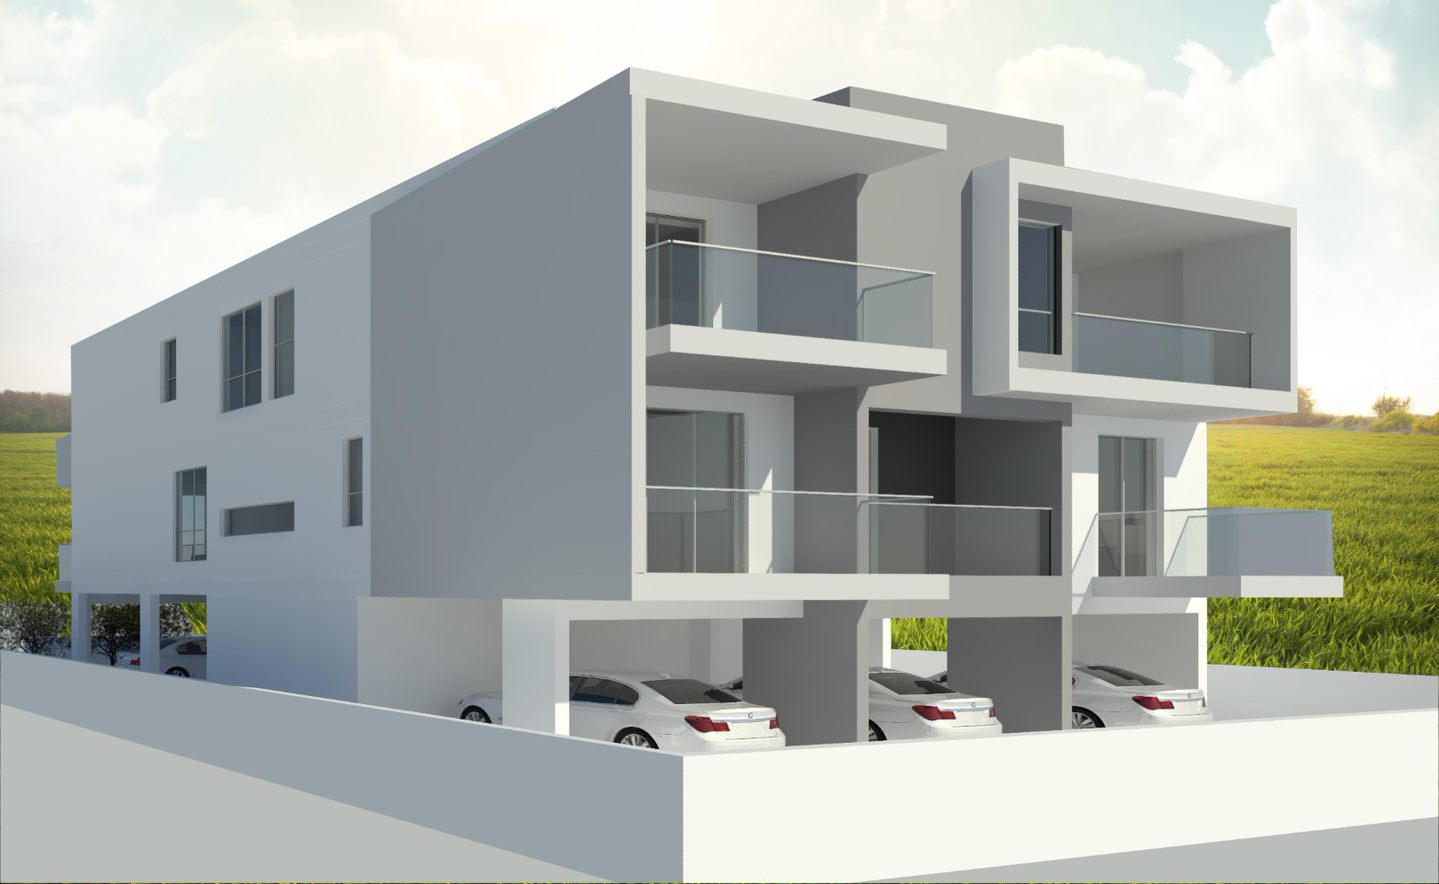 3 Bedroom Apartment for Sale in Chlorakas, Paphos District